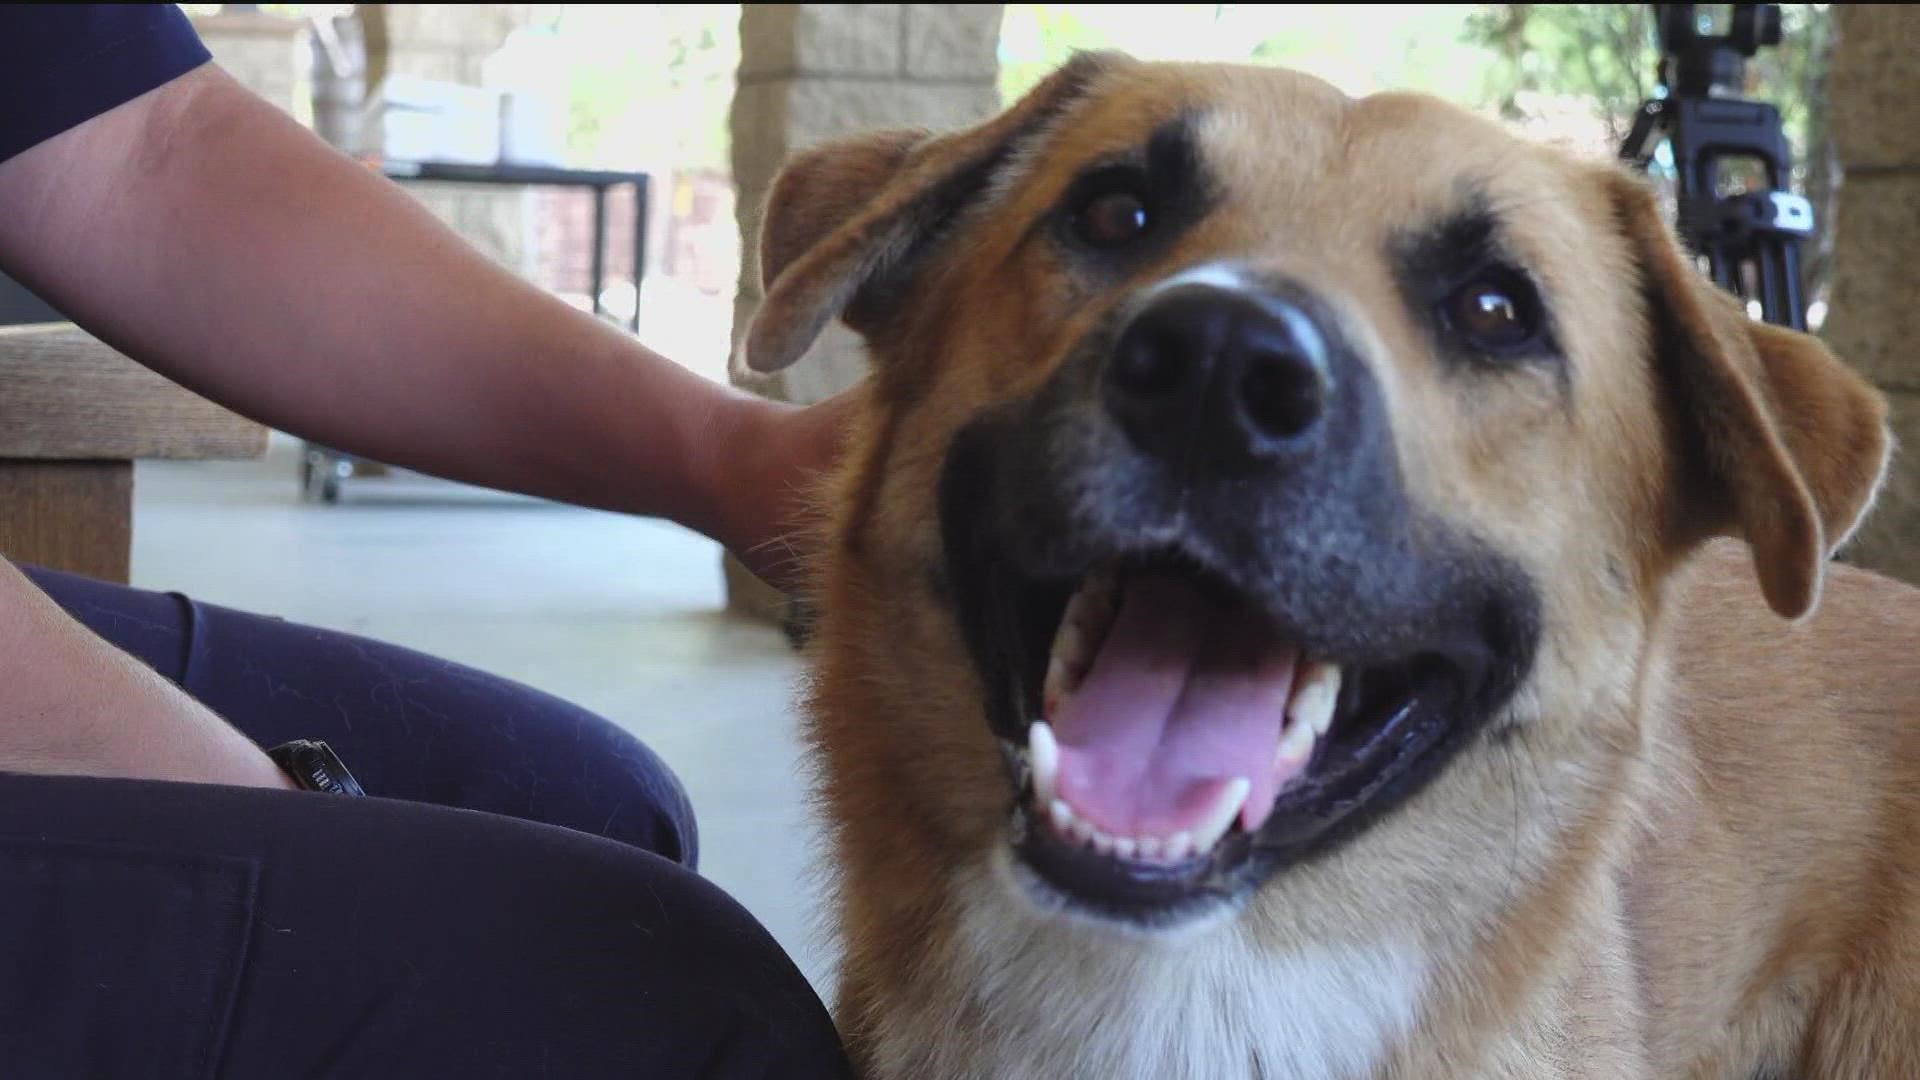 The dog is a male shepherd, with no microchip. He will be placed on stray hold as the Humane Society searches for his owner.